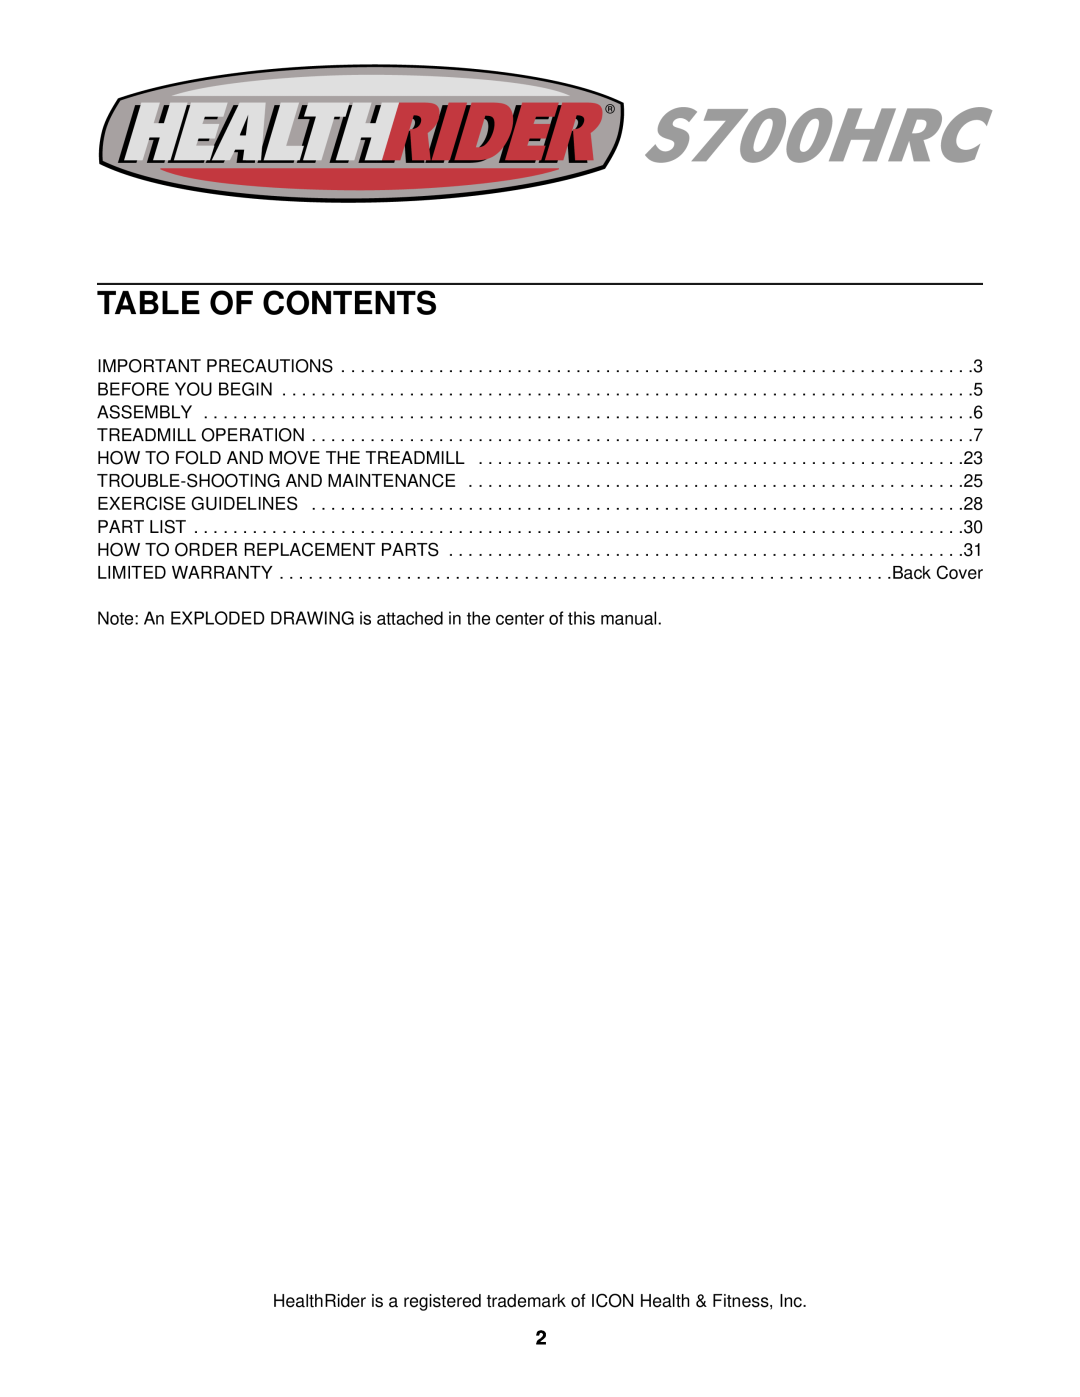 Healthrider HRTL14910 Table Of Contents, Note An EXPLODED DRAWING is attached in the center of this manual 